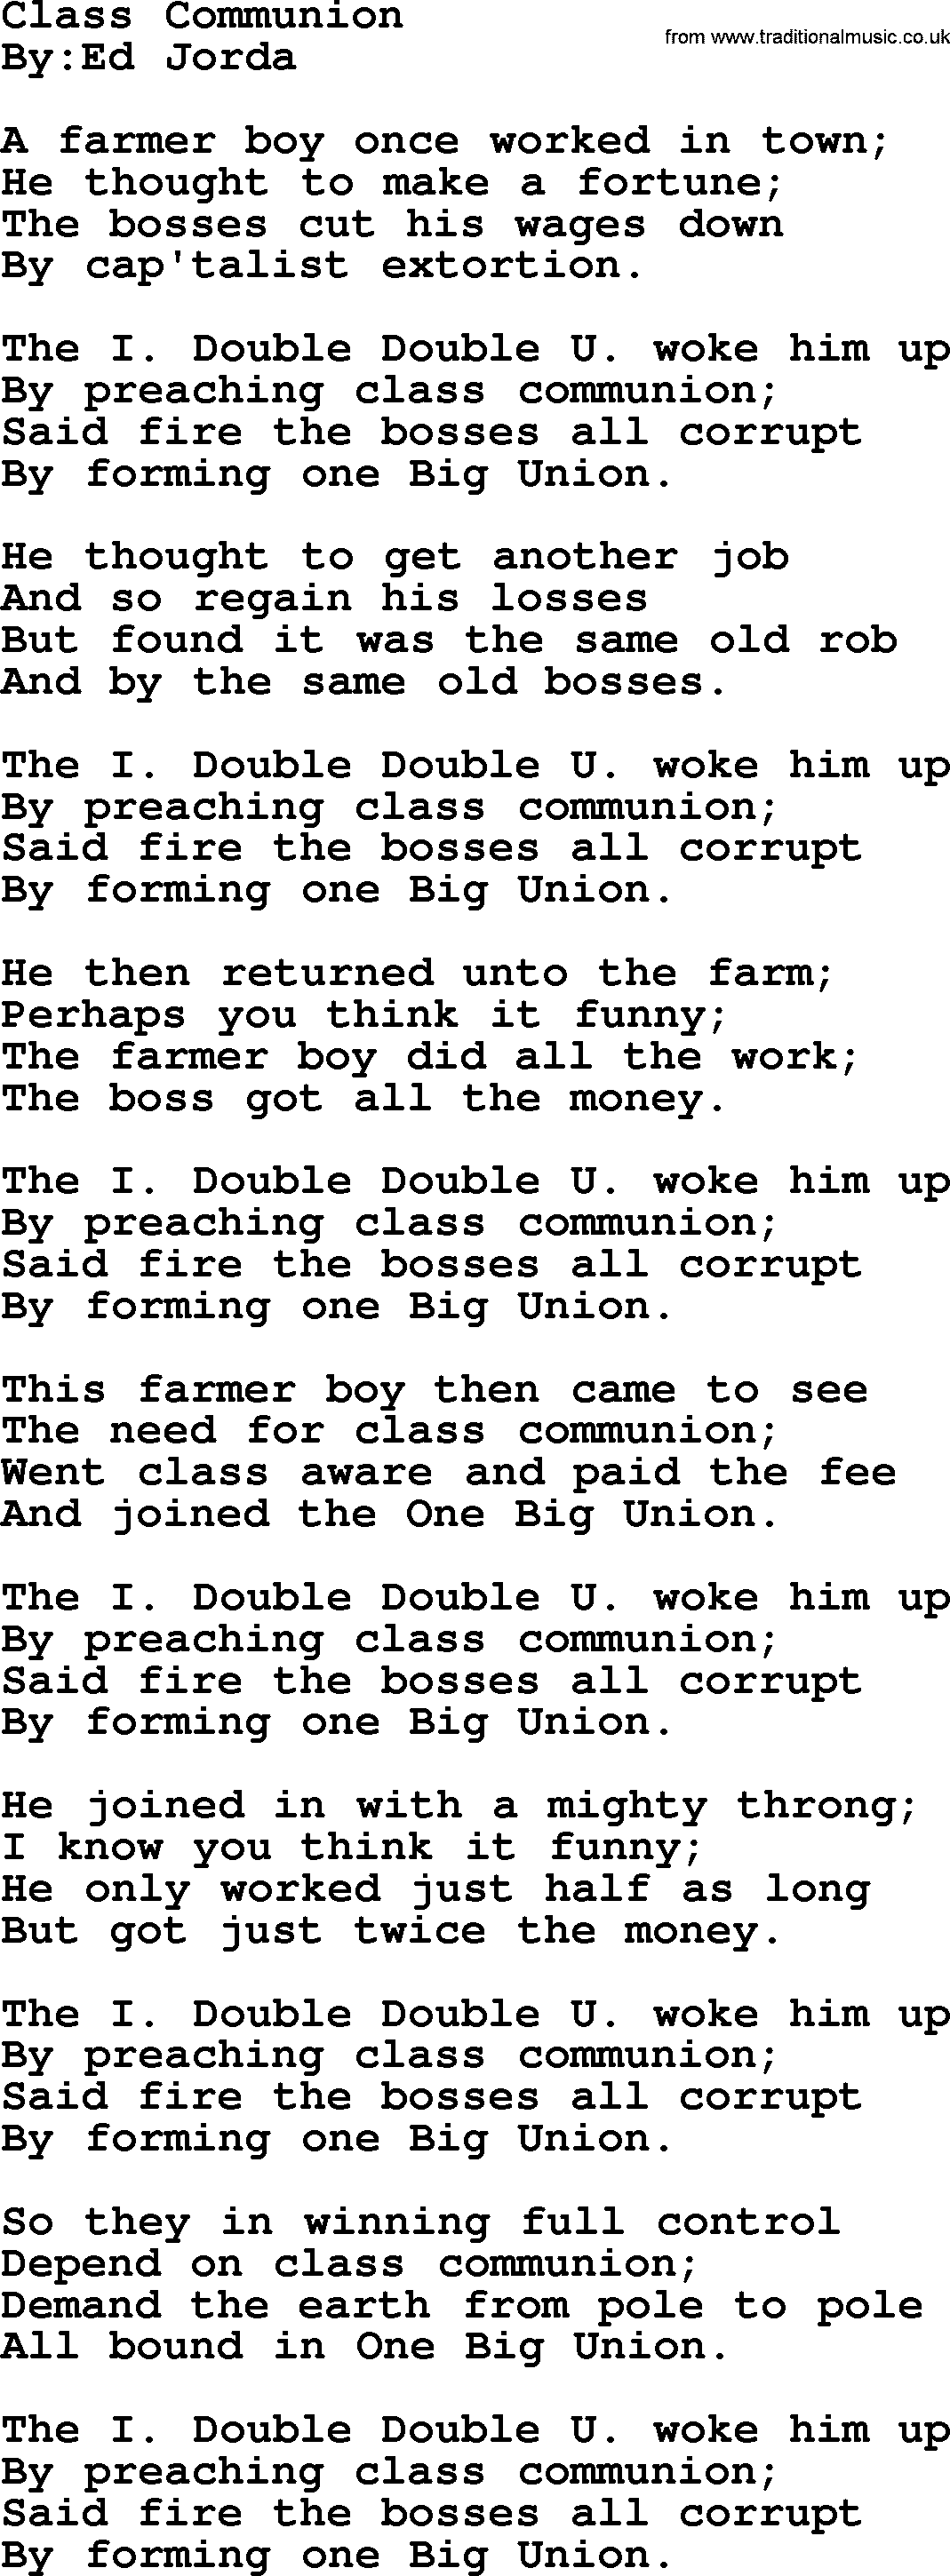 Political, Solidarity, Workers or Union song: Class Communion, lyrics